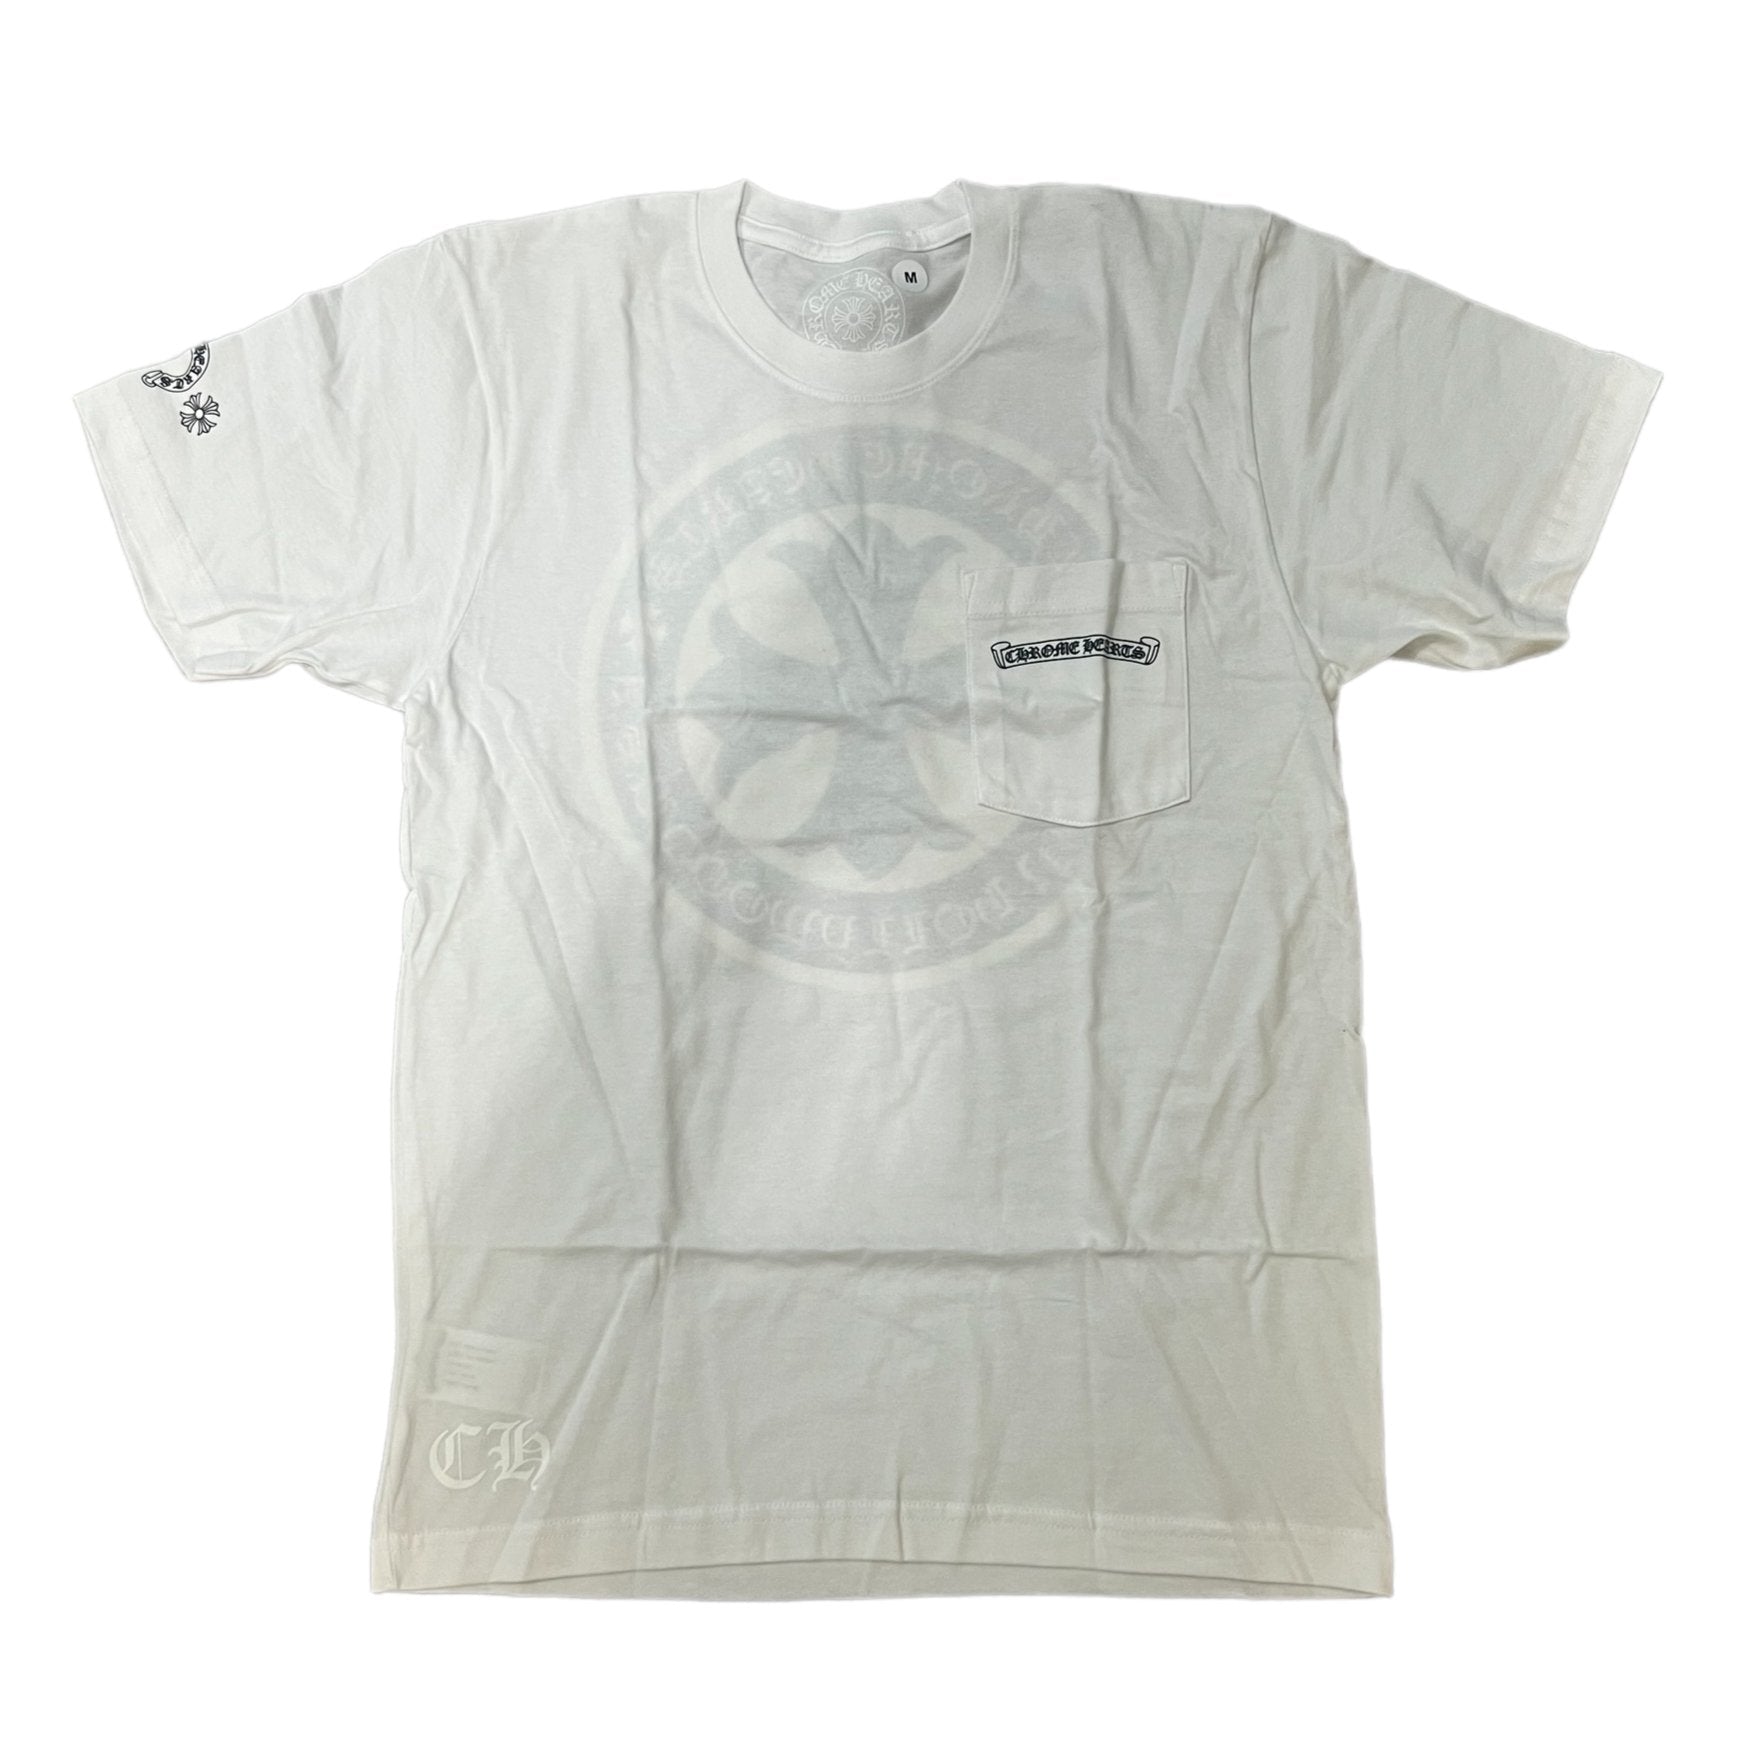 Chrome Hearts Emblem S/S Tee White / Gold - Sneakersbe Sneakers Sale Online